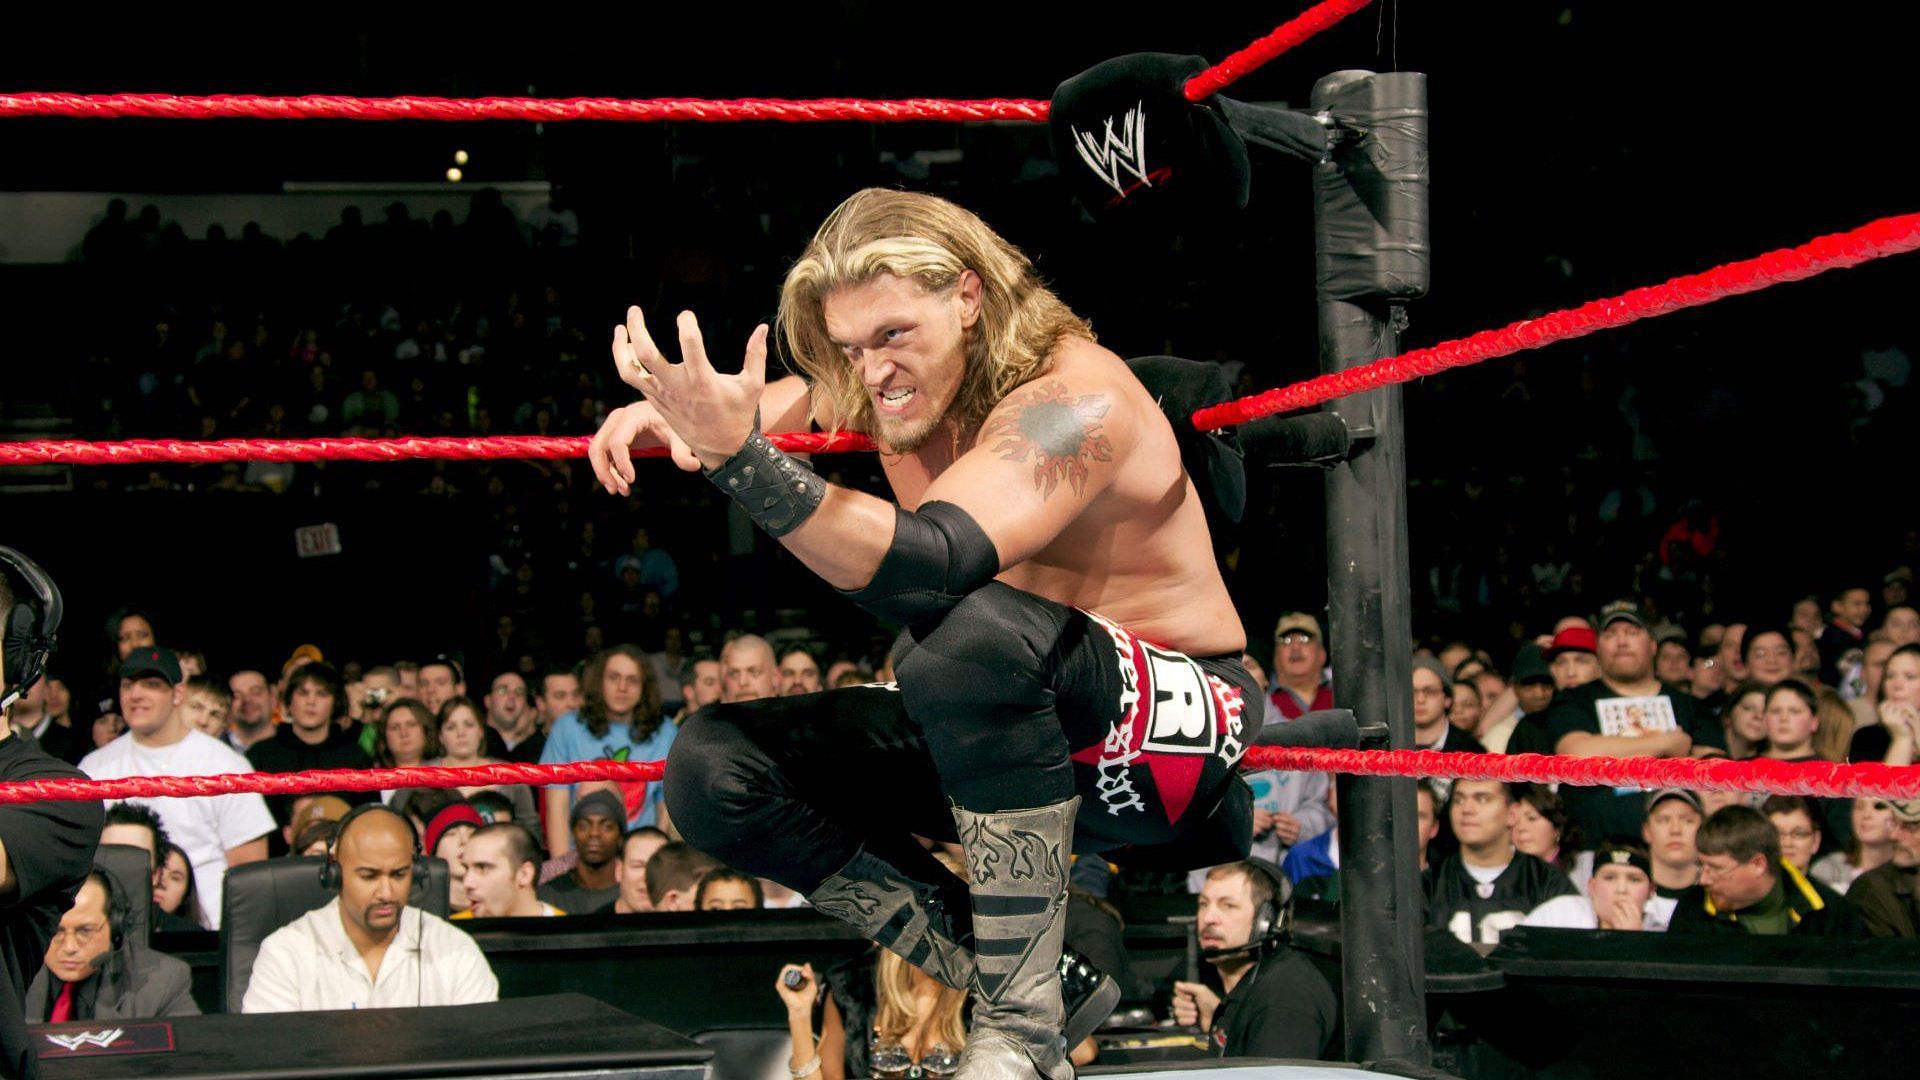 Edge is a former world champion